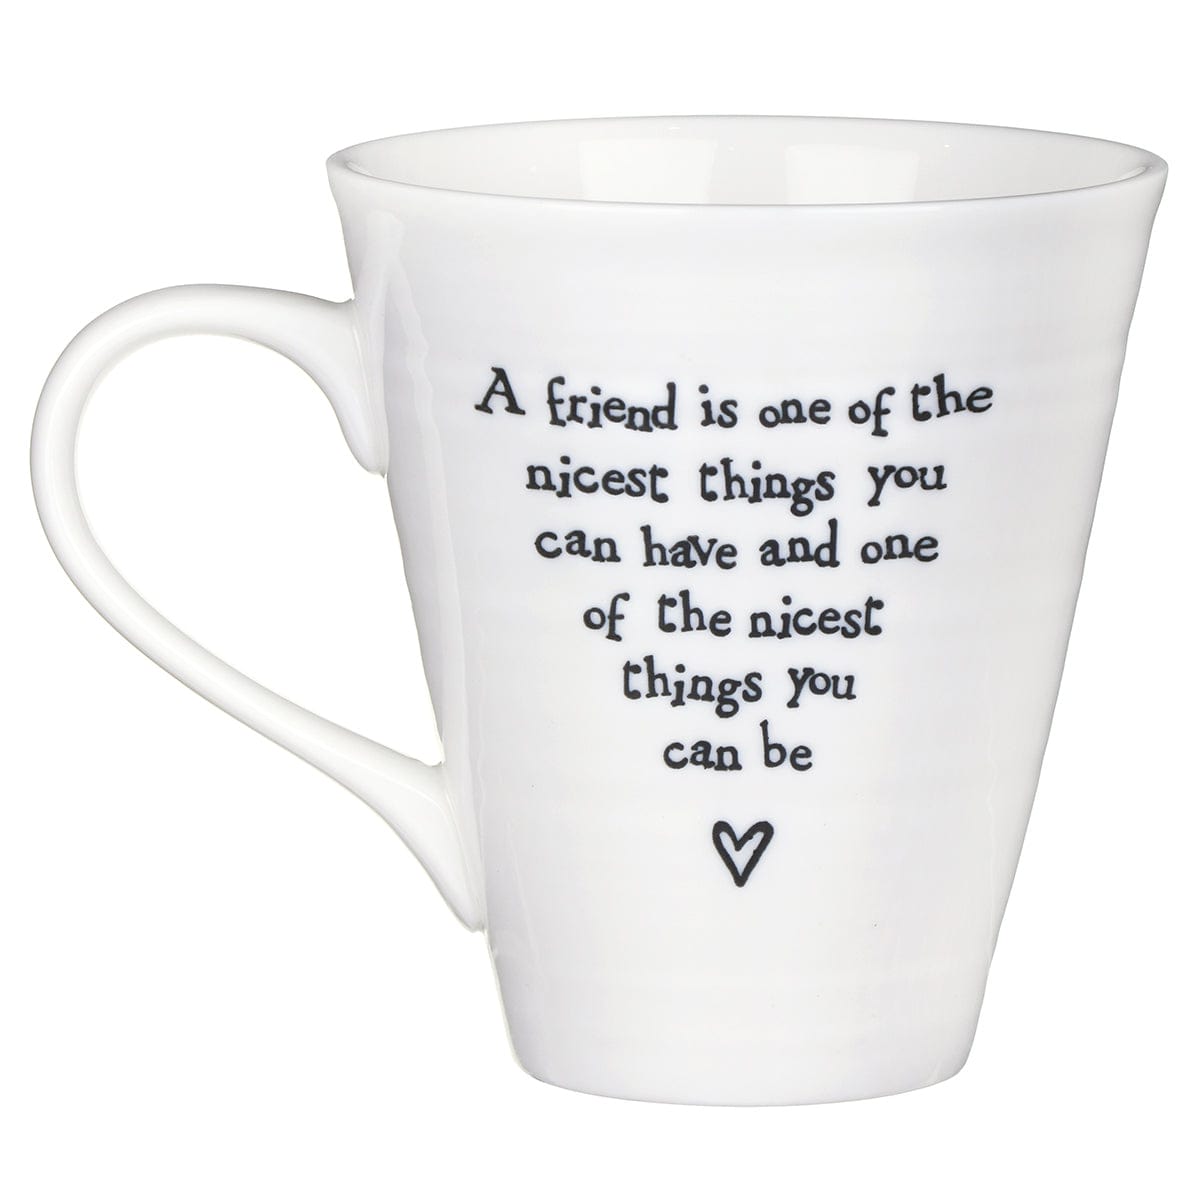 East of India Mugs & Drinkware A Friend Is One Of The Nicest Things Porcelain Mug